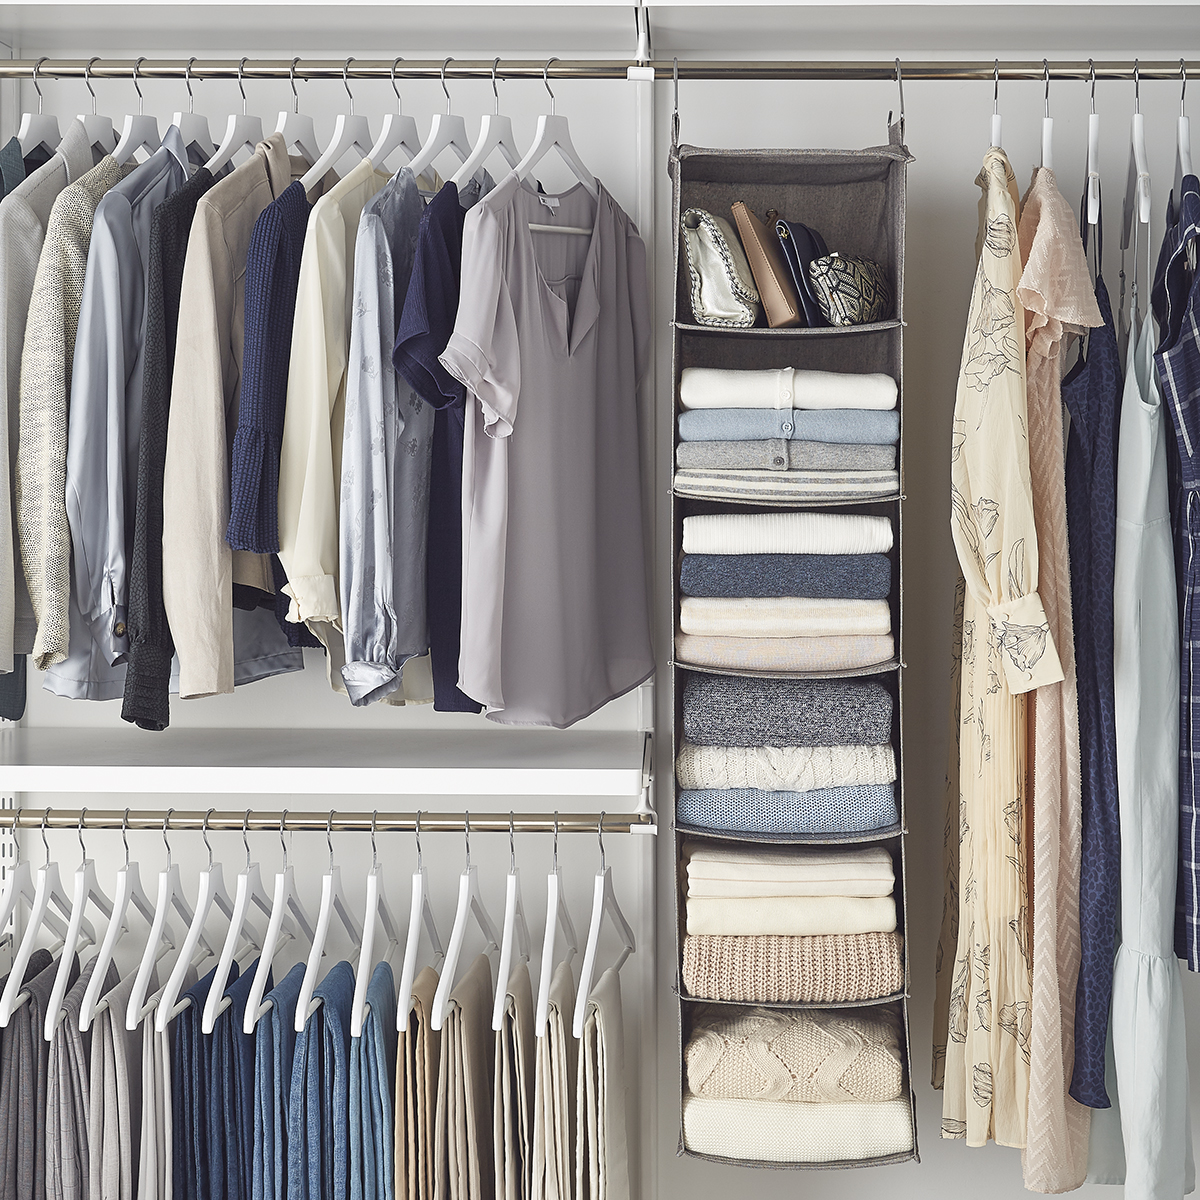 Hanging Wide Closet Organizers | The Container Store